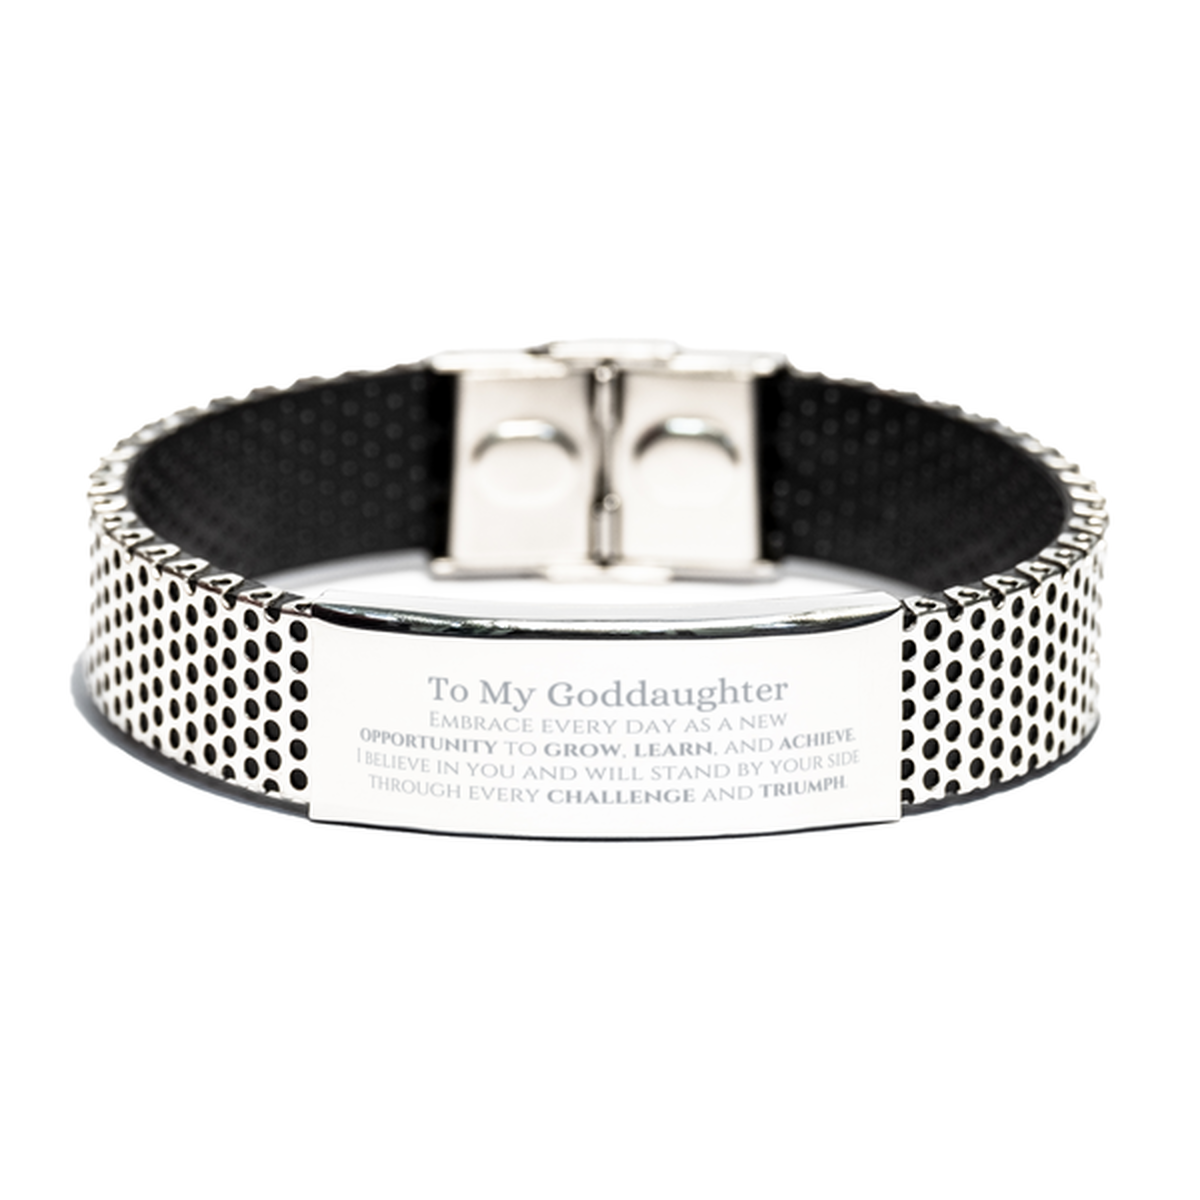 To My Goddaughter Gifts, I believe in you and will stand by your side, Inspirational Stainless Steel Bracelet For Goddaughter, Birthday Christmas Motivational Goddaughter Gifts